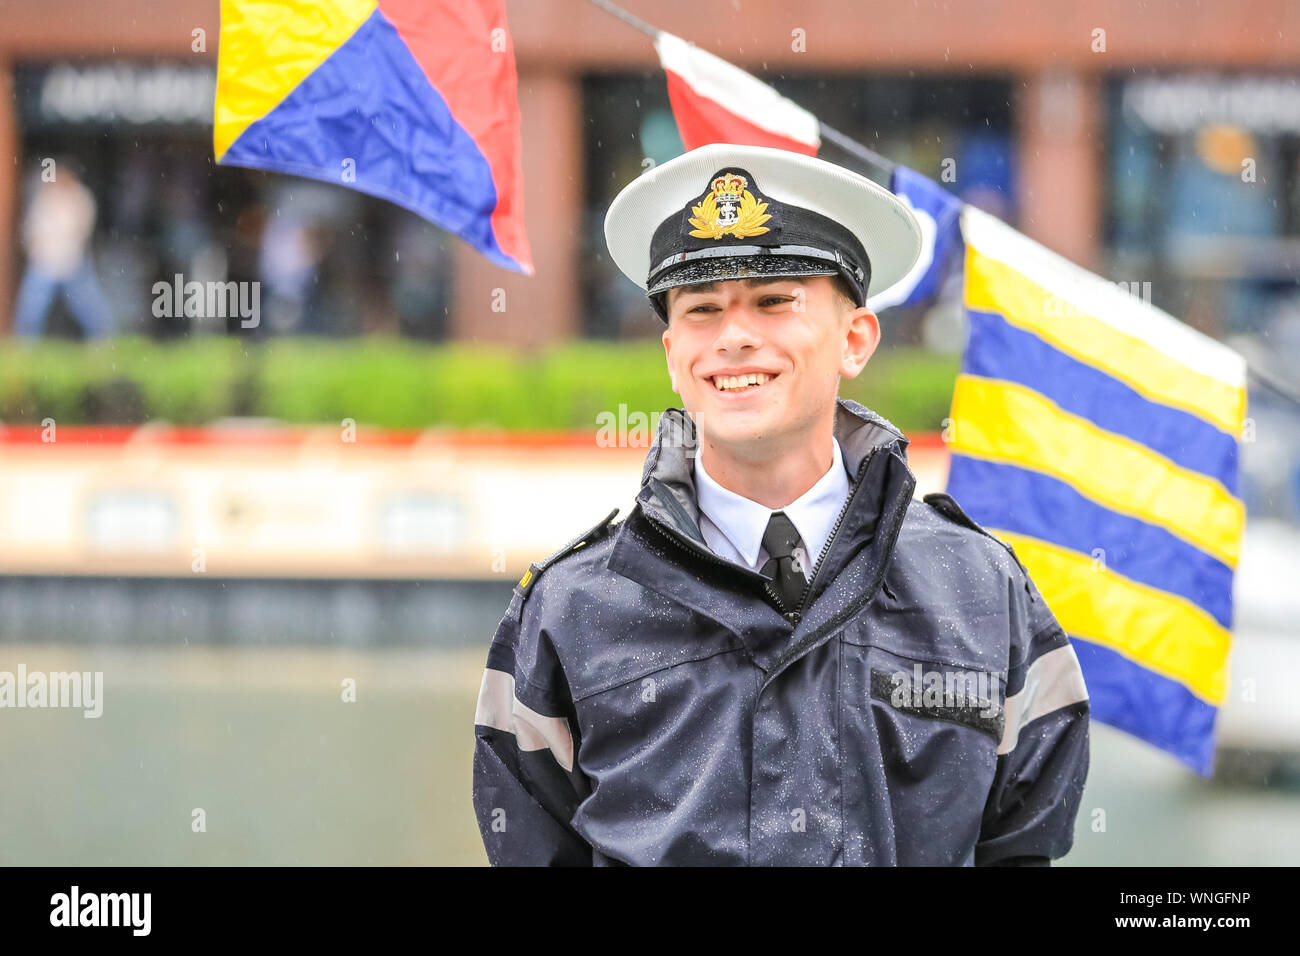 St. Katharine Docks, London, 06th Sep 2019. A crew member on the HMS Blazer, a Royal Navy training vessel, smiles as he welcomes visitors to look around the vessel. Classic boats and barges, decorated smaller vessels and water craft are moored in St. Katharine Docks for the annual Classic Boat Festival. The free festival also features food and drink stalls, stages, bands and free paddle boarding and other activities, and is on for three days until Sunday 8th September. Credit: Imageplotter/Alamy Live News Credit: Imageplotter/Alamy Live News Stock Photo